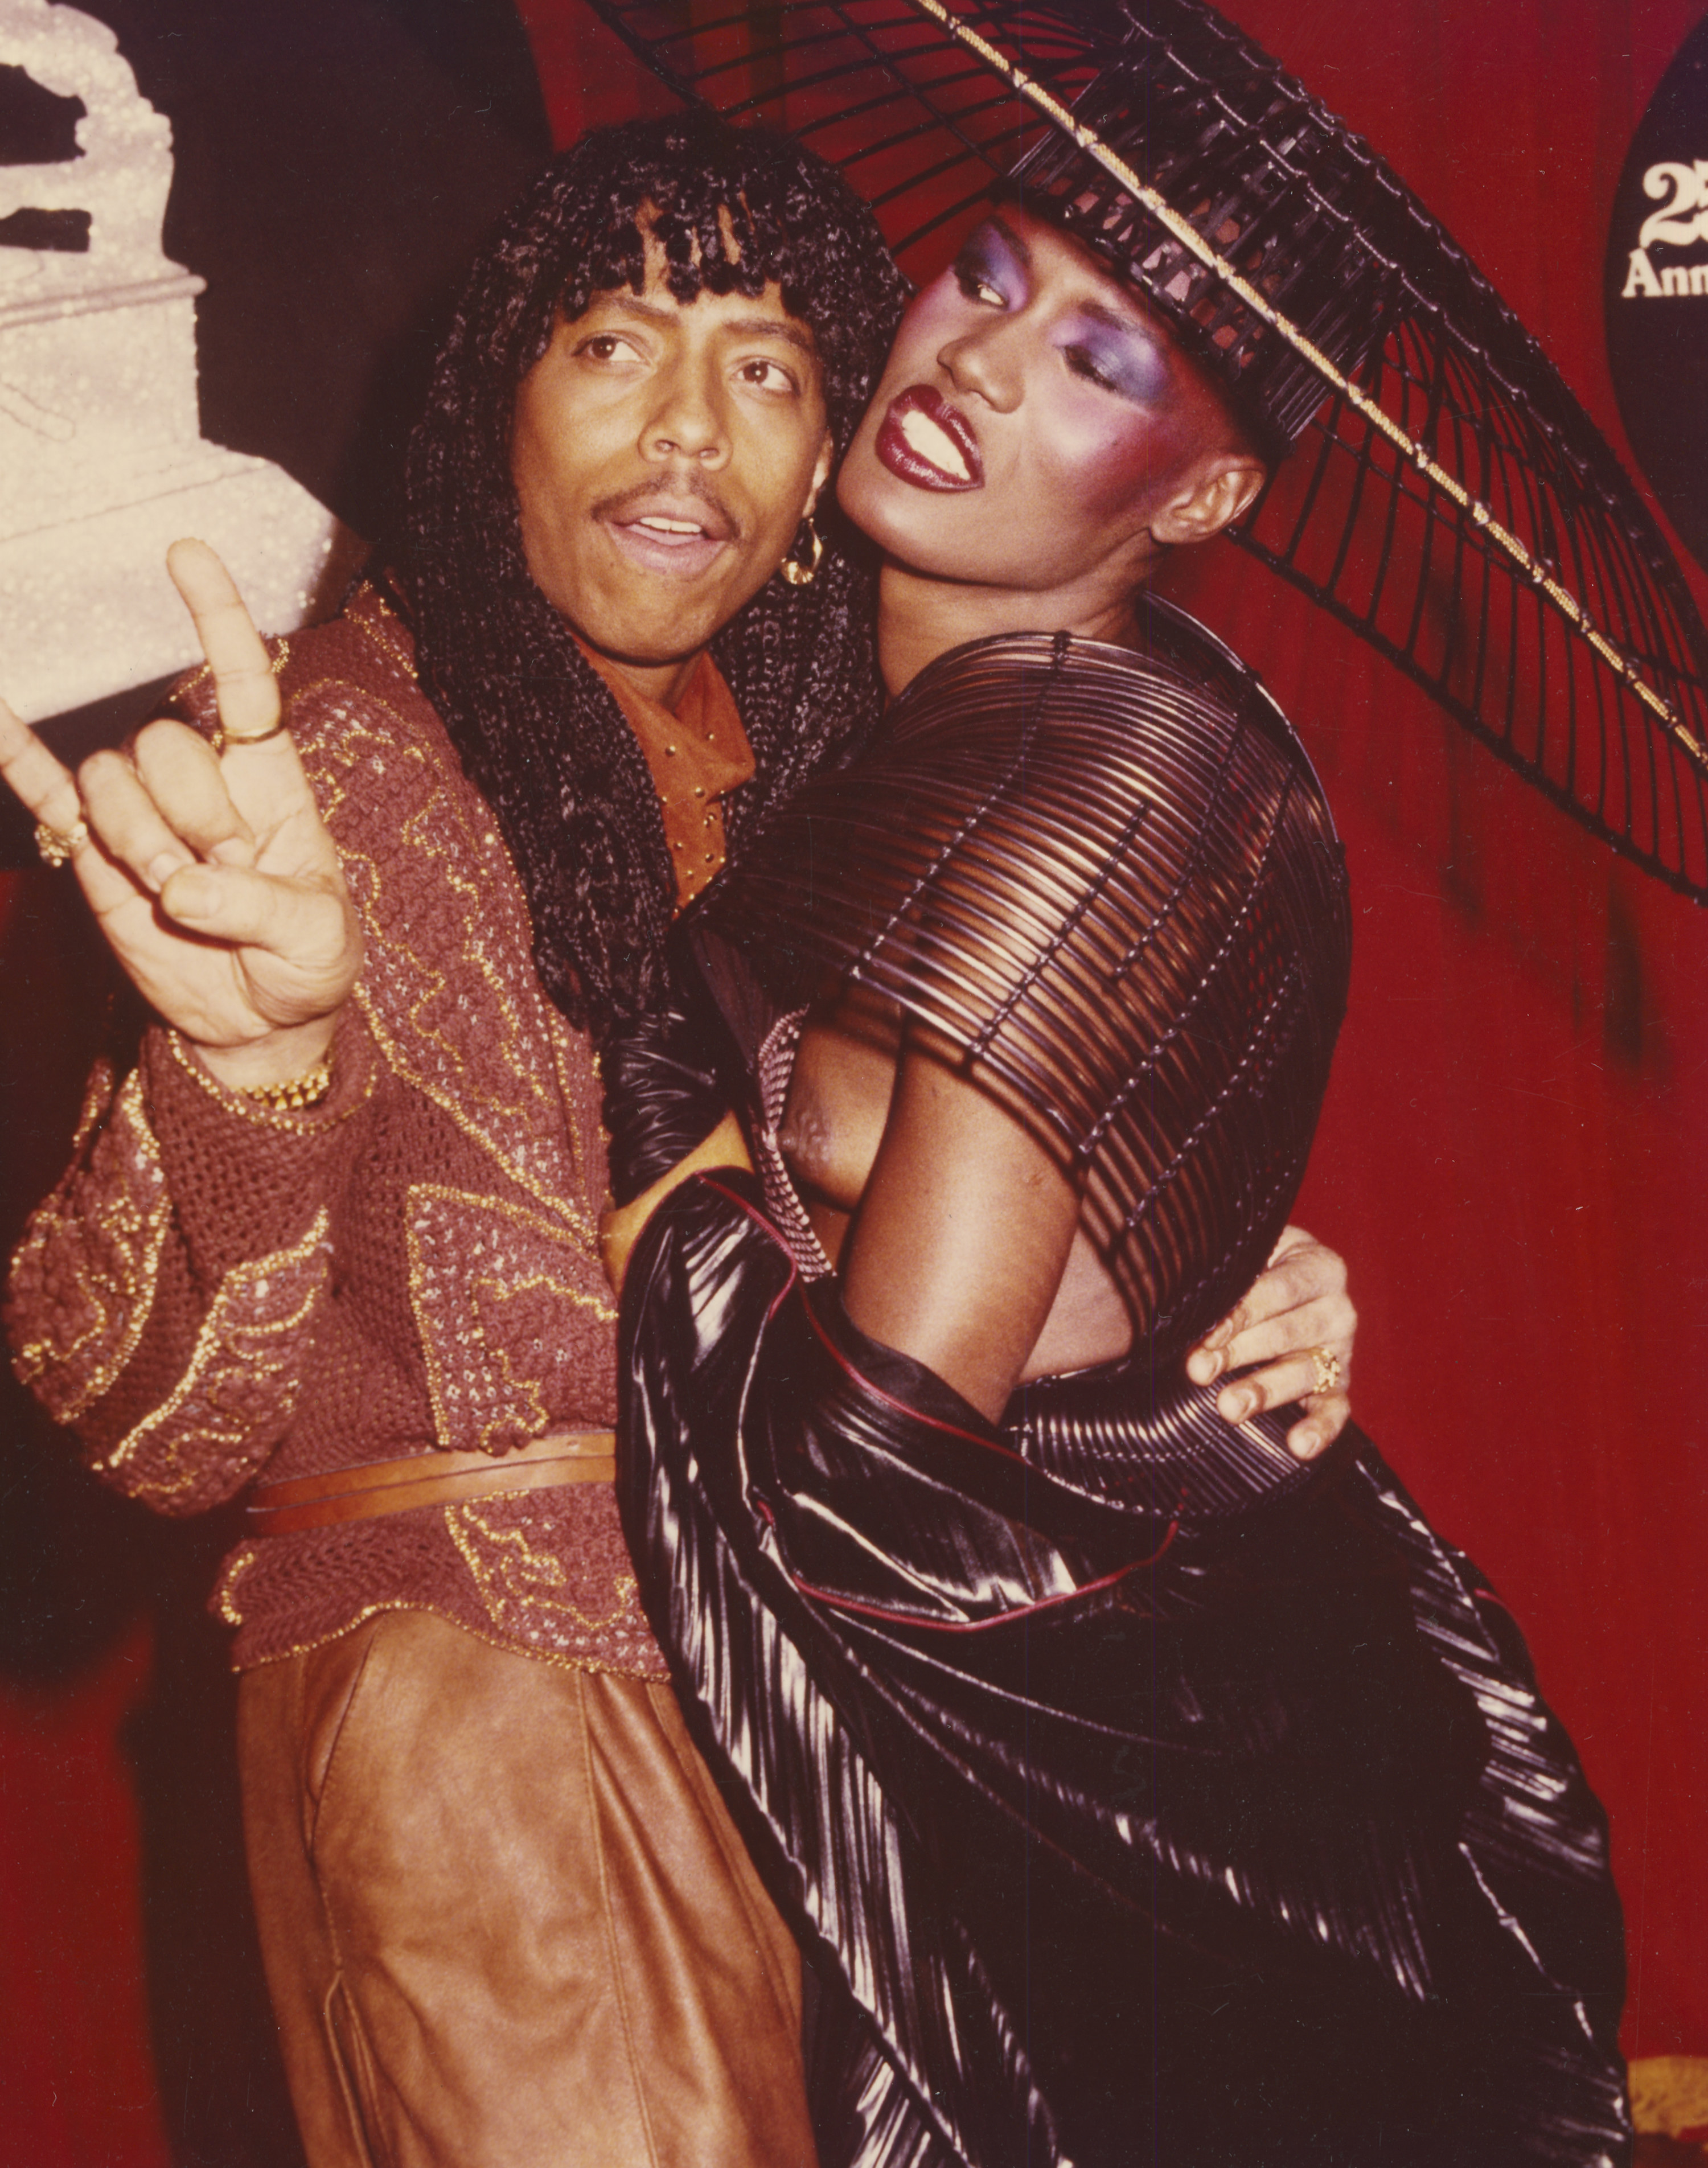 Rick James and Grace Jones posing together on the red carpet at the 25th Annual Grammy Awards